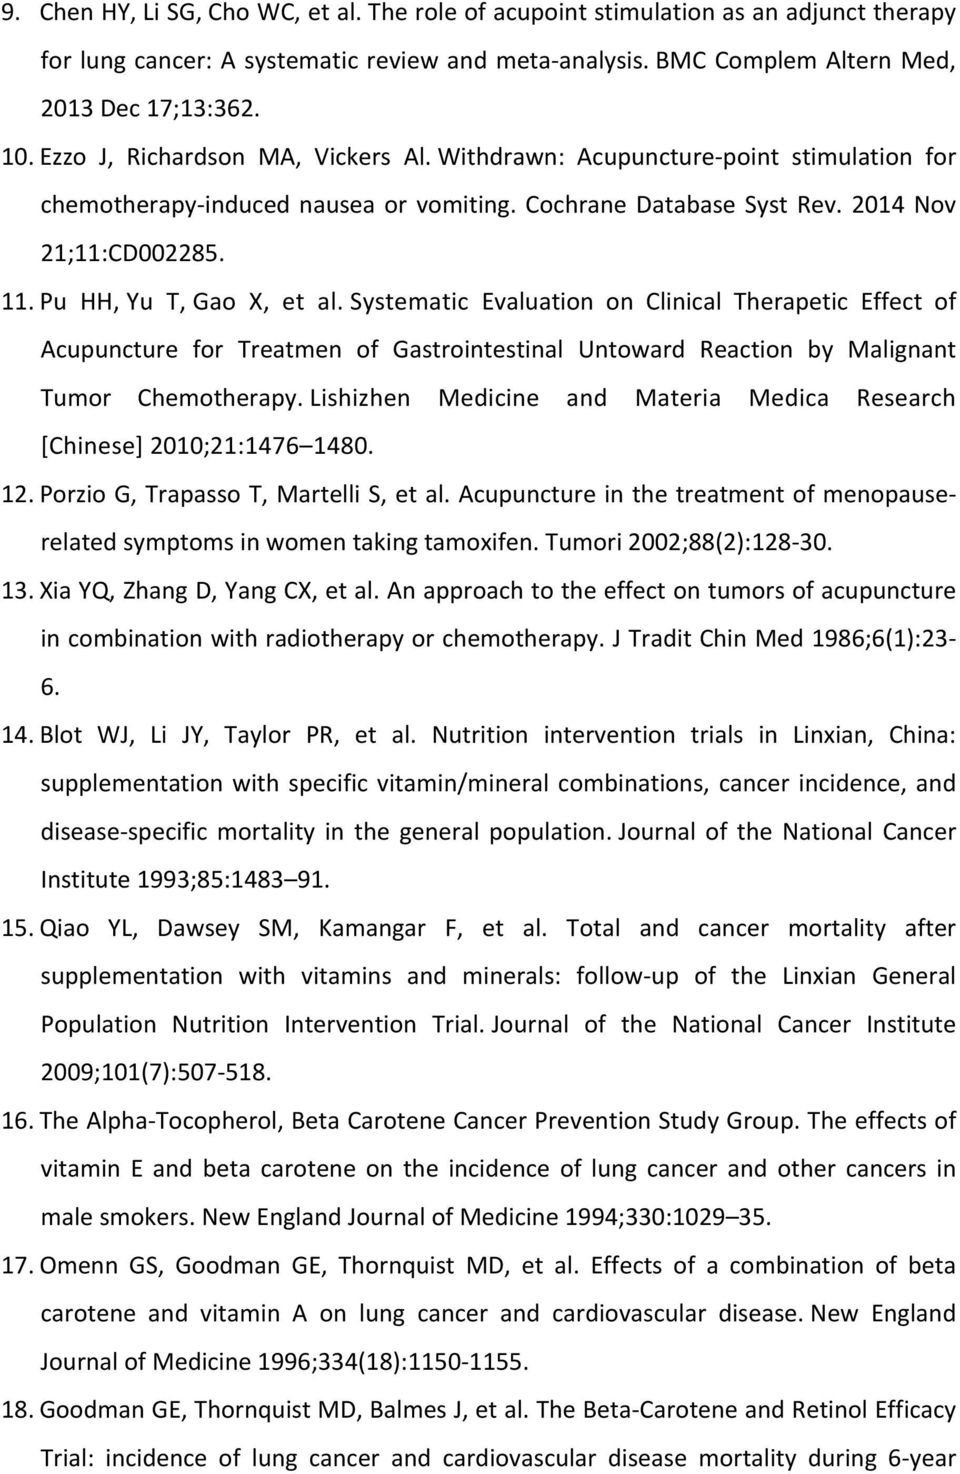 Pu HH, Yu T, Gao X, et al. Systematic Evaluation on Clinical Therapetic Effect of Acupuncture for Treatmen of Gastrointestinal Untoward Reaction by Malignant Tumor Chemotherapy.